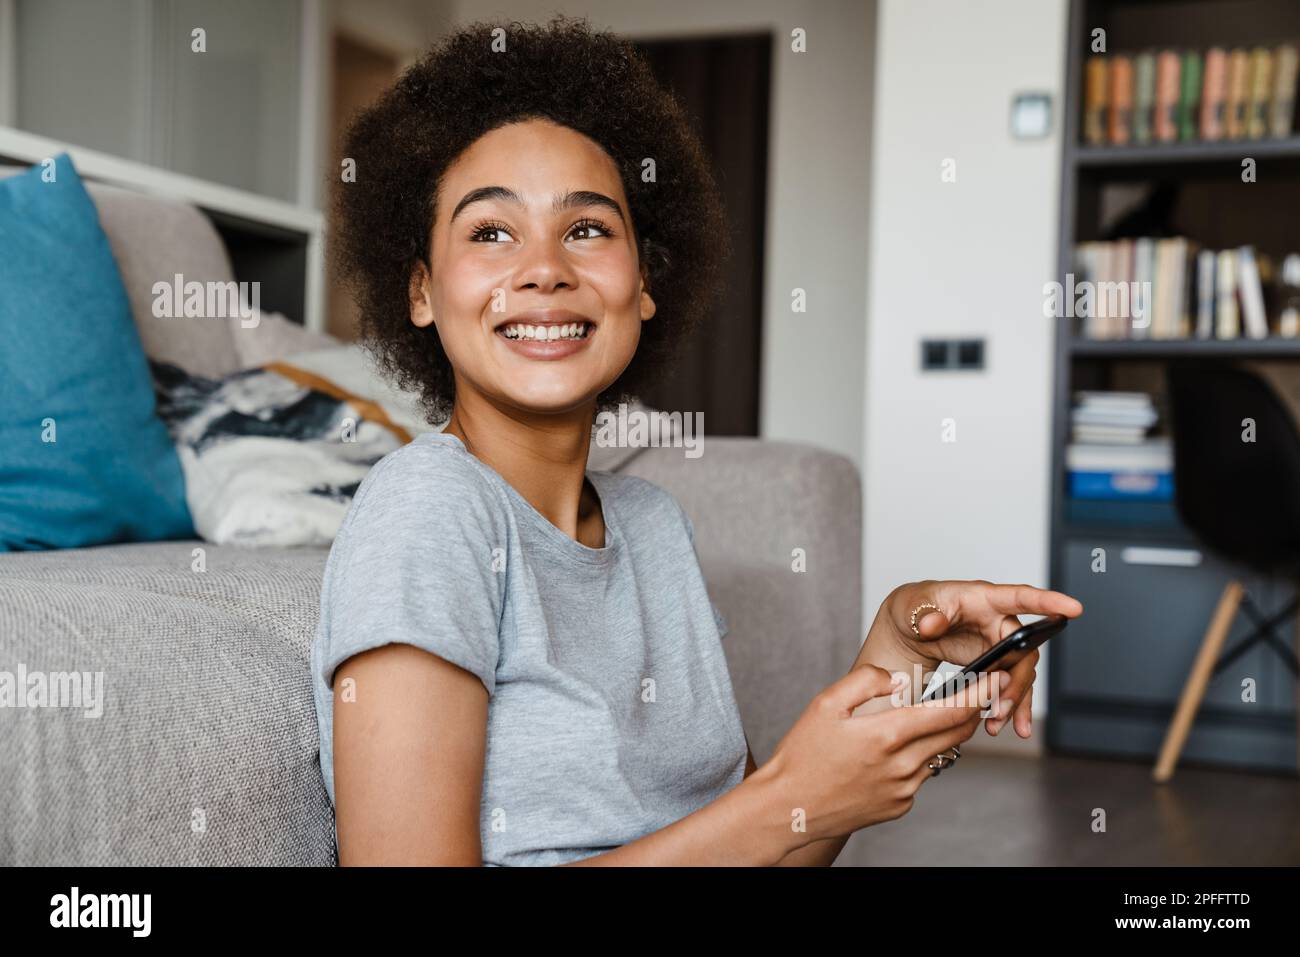 Portrait of young beautiful smiling curly african woman holding phone and looking aside ,sitting on the floor leaning on couch at home Stock Photo